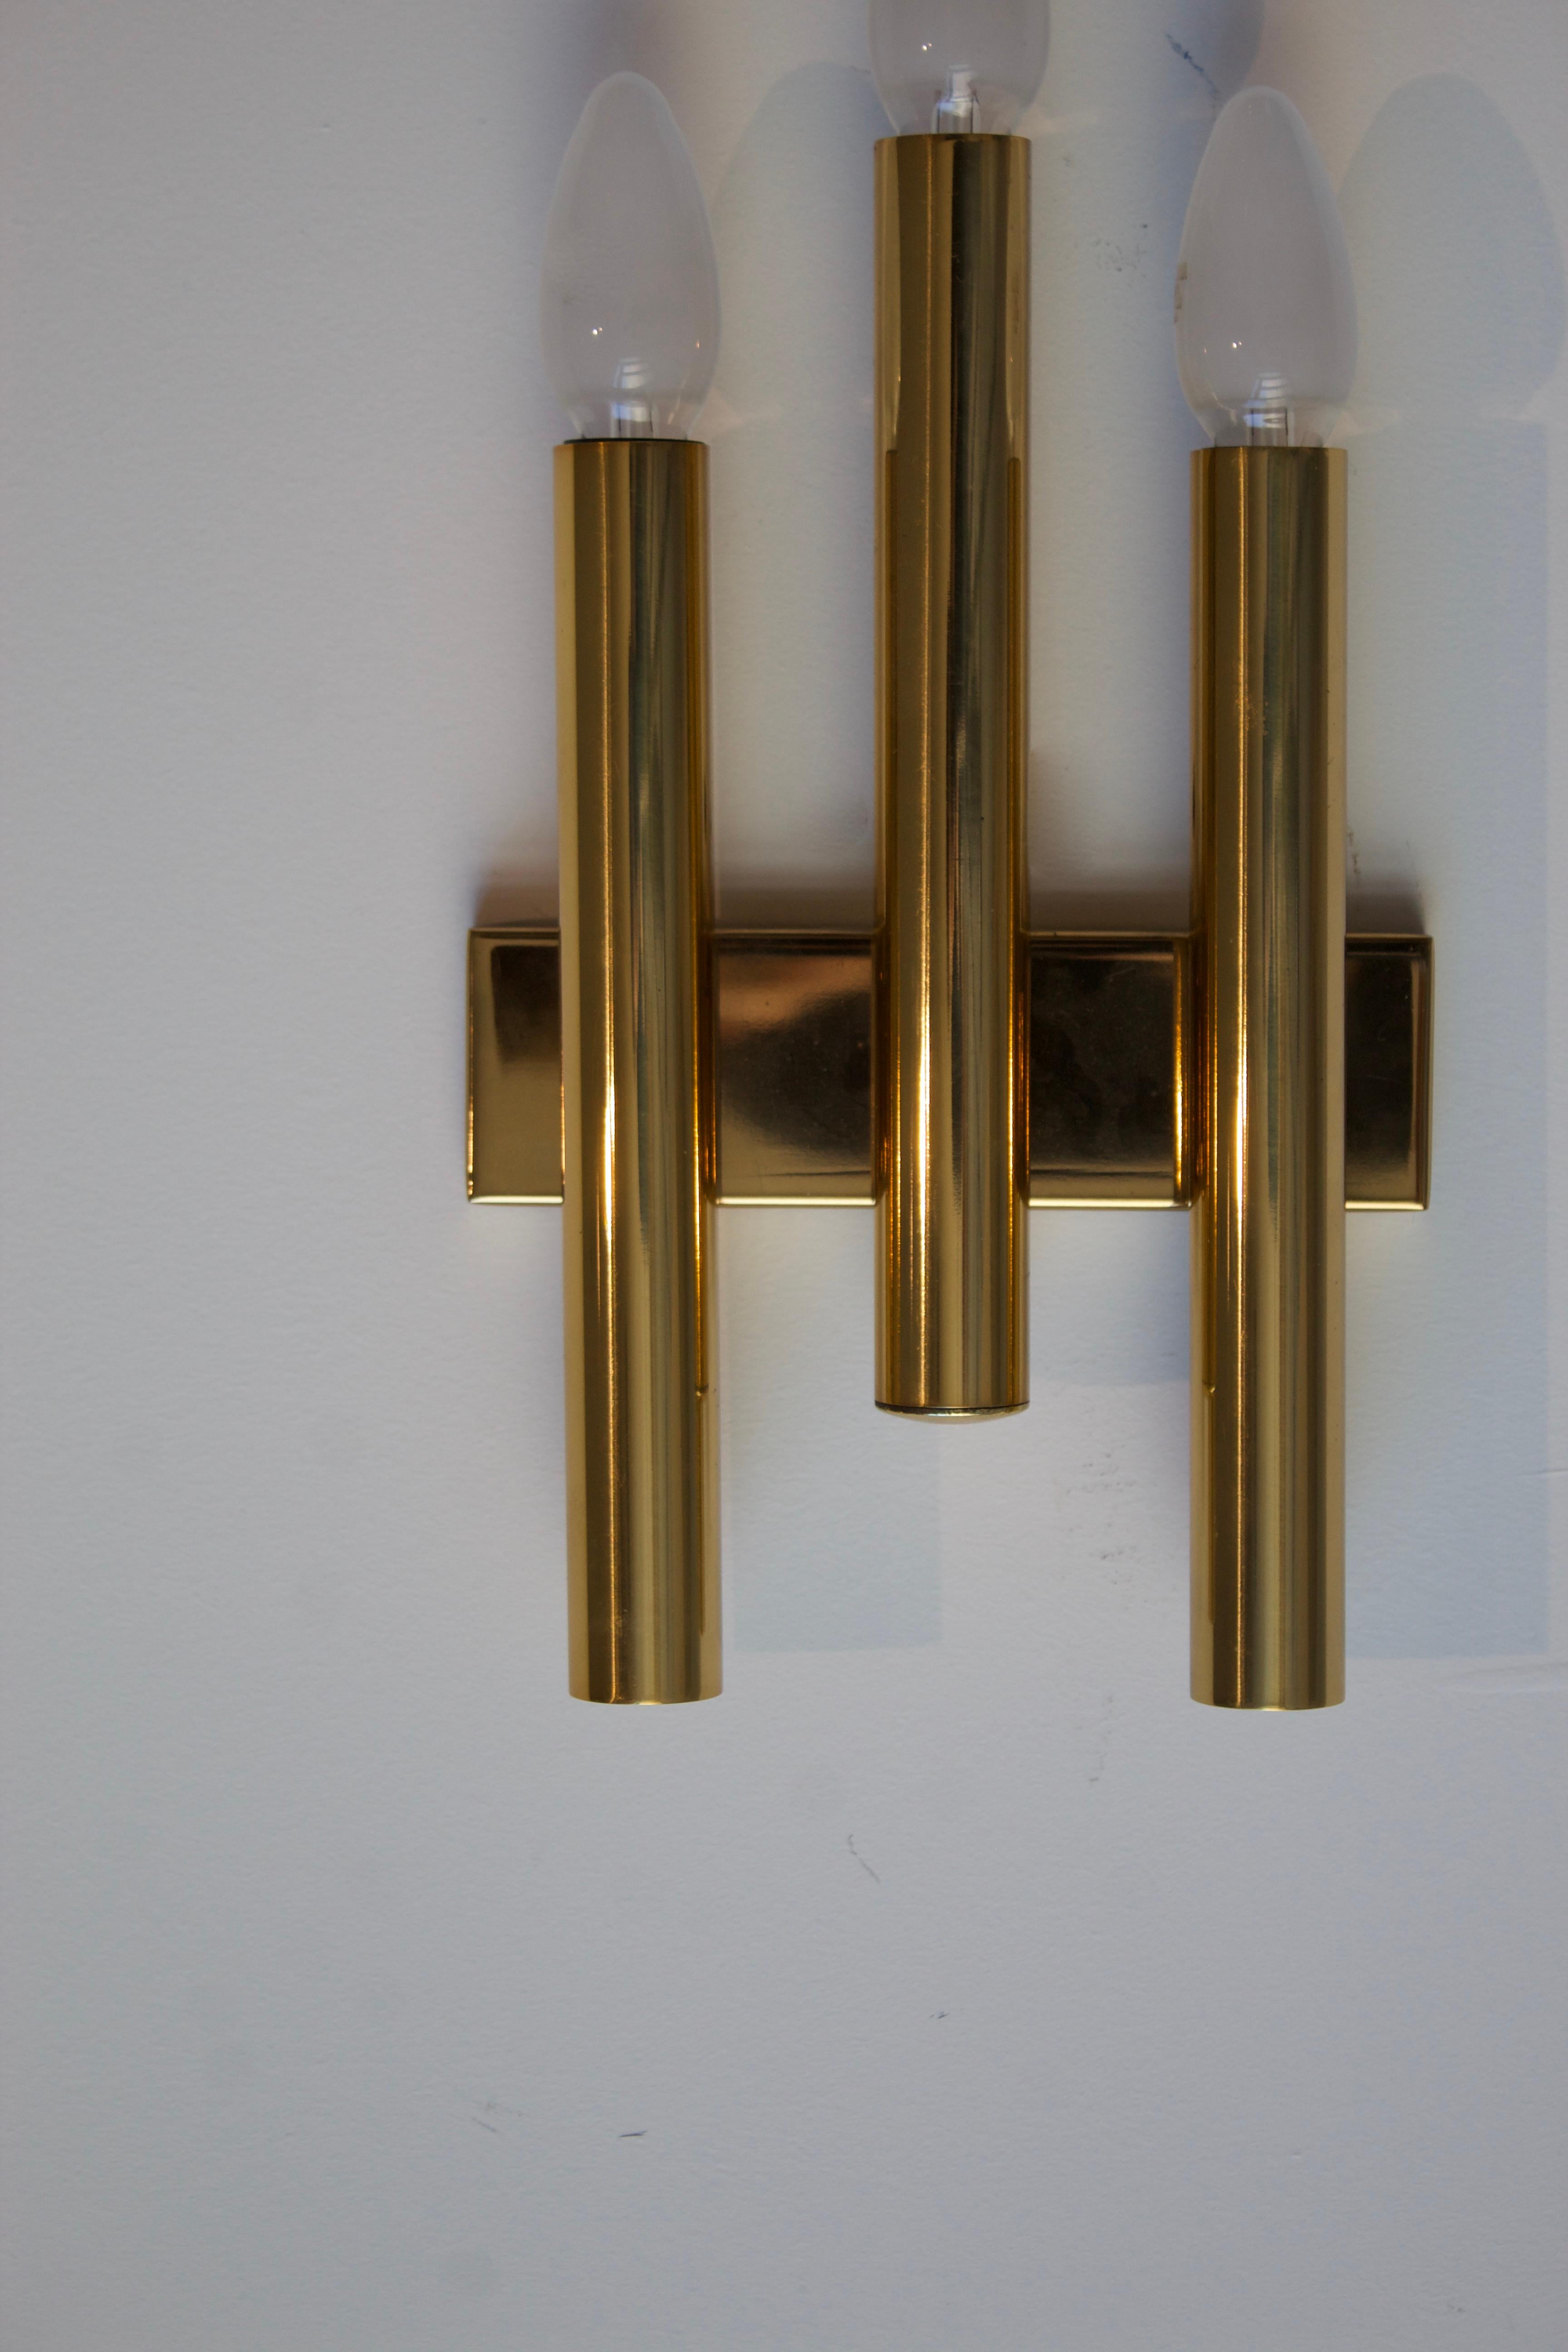 Italian Candle, Three Armed Wall Lights / Sconces, Brass, Italy, 1960s For Sale